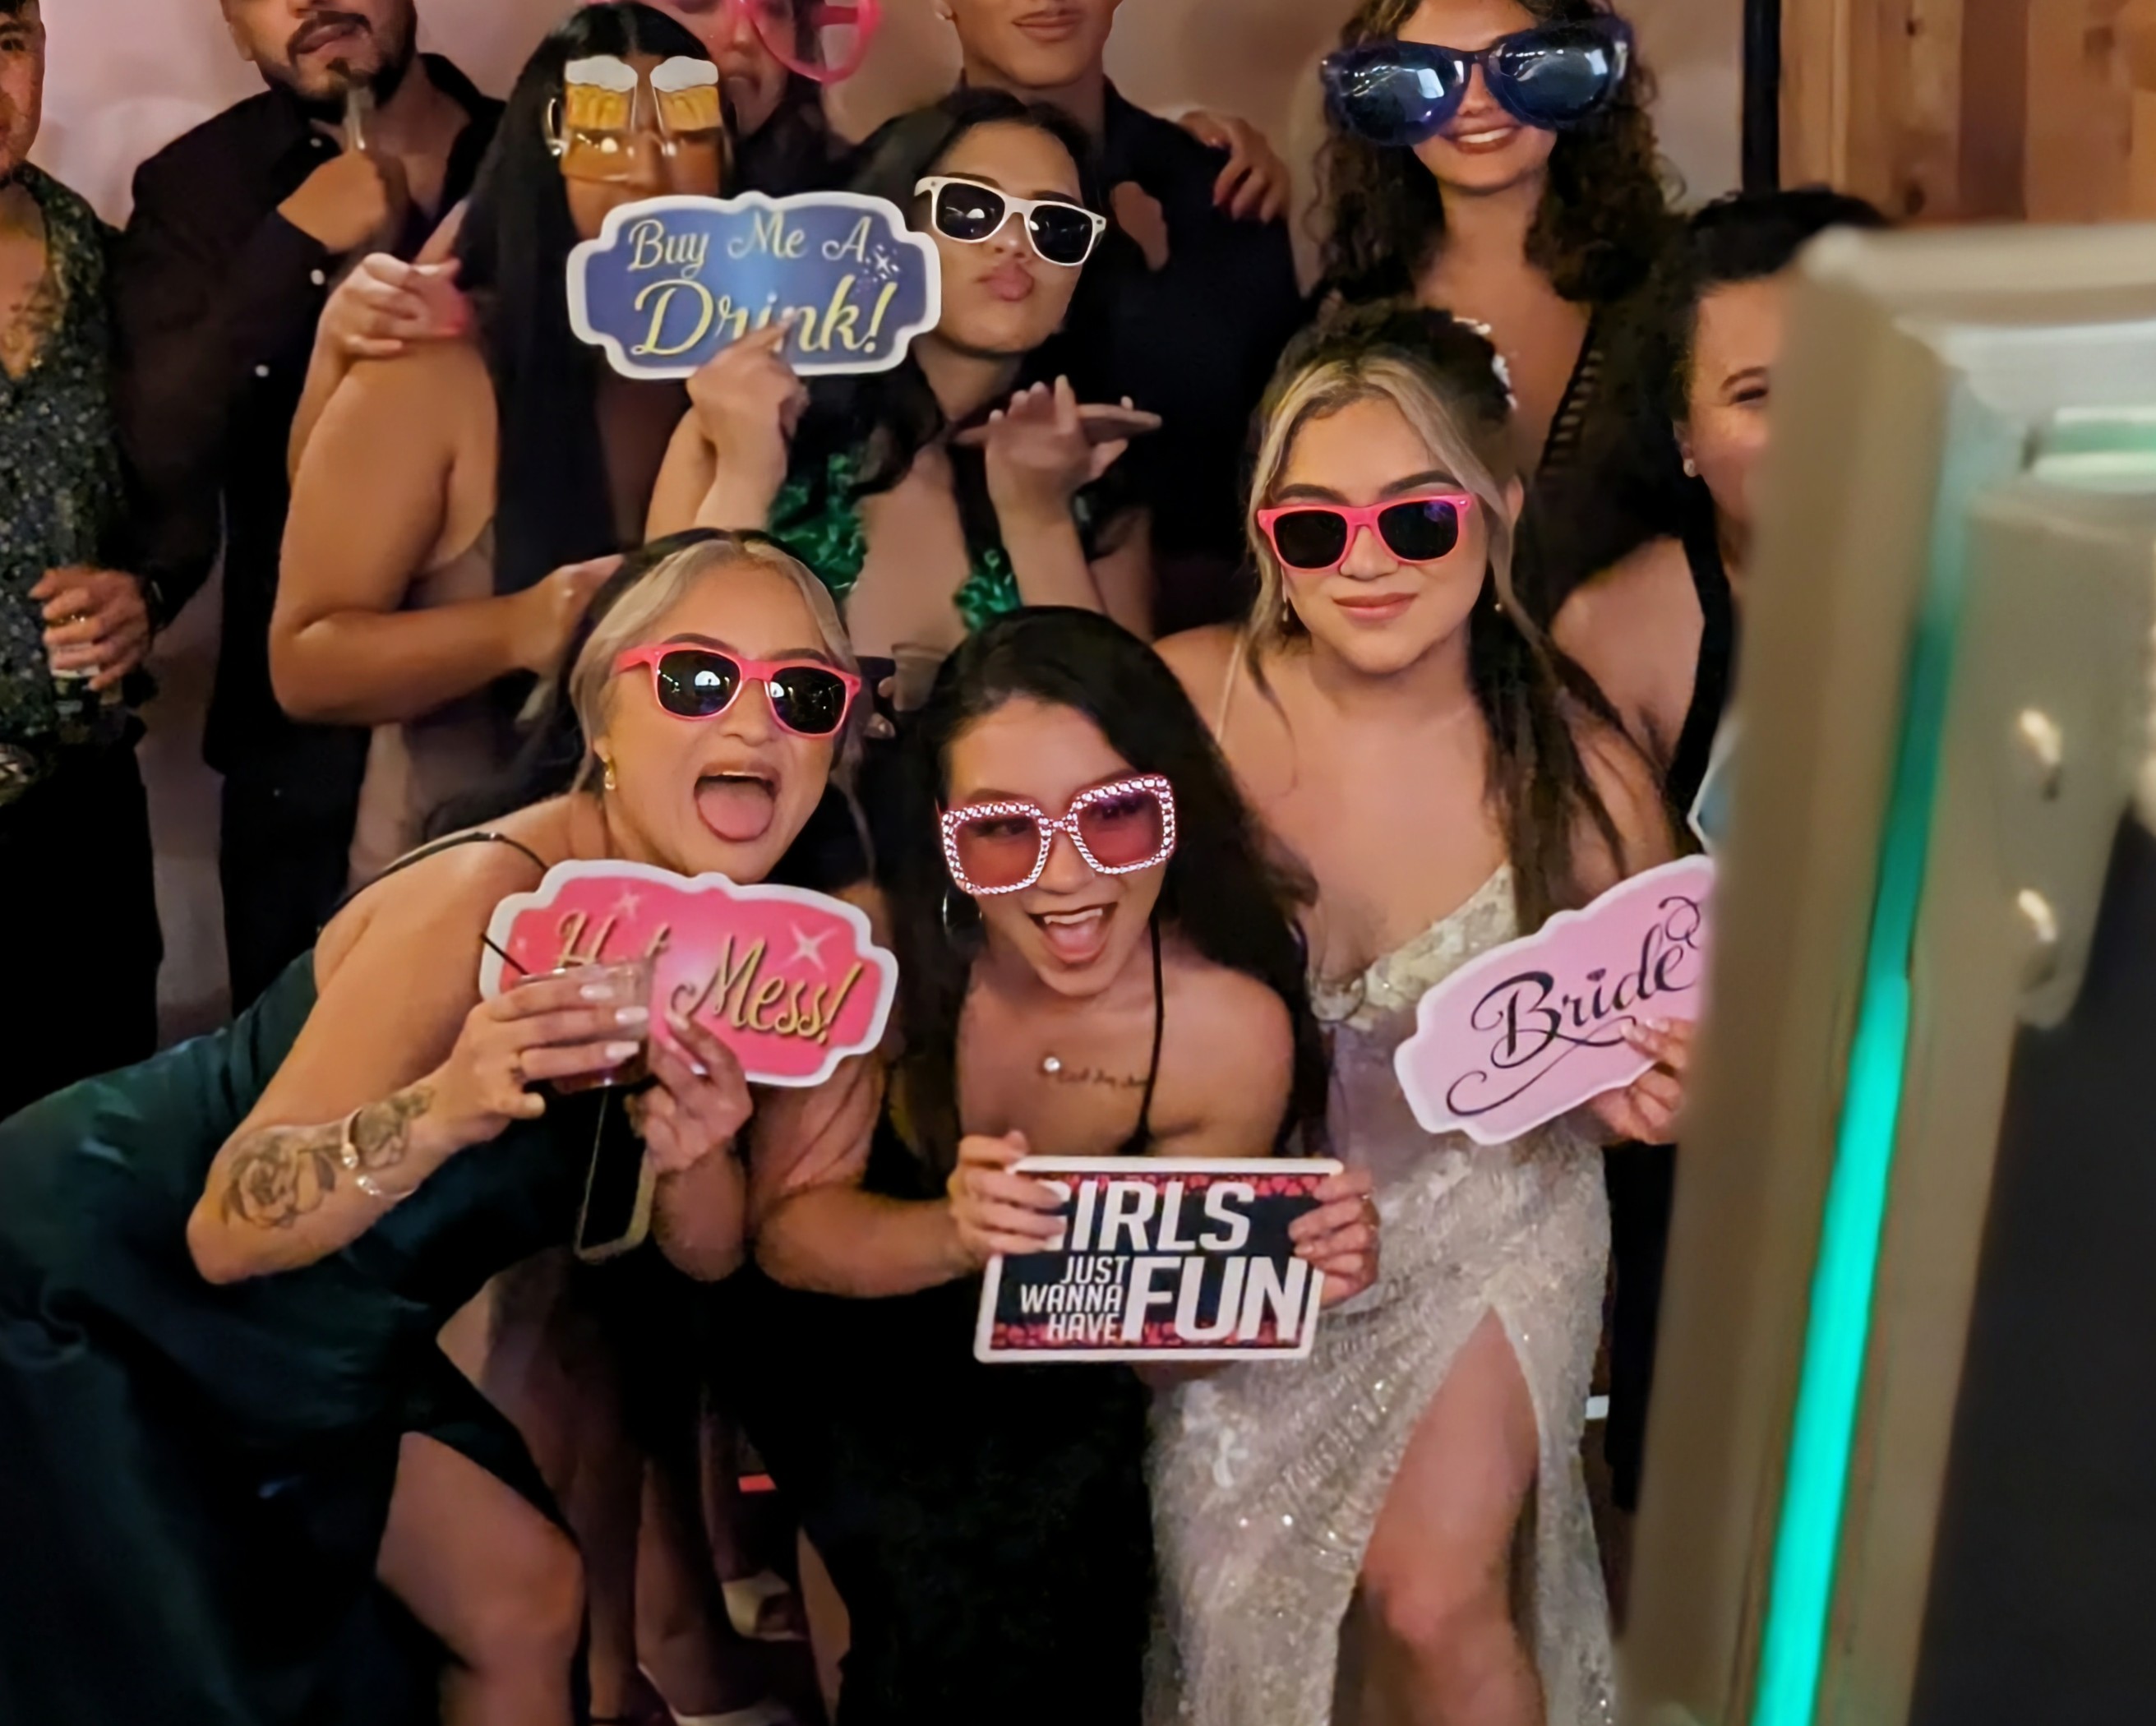 Group of friends celebrating with fun props at a wedding photo booth.